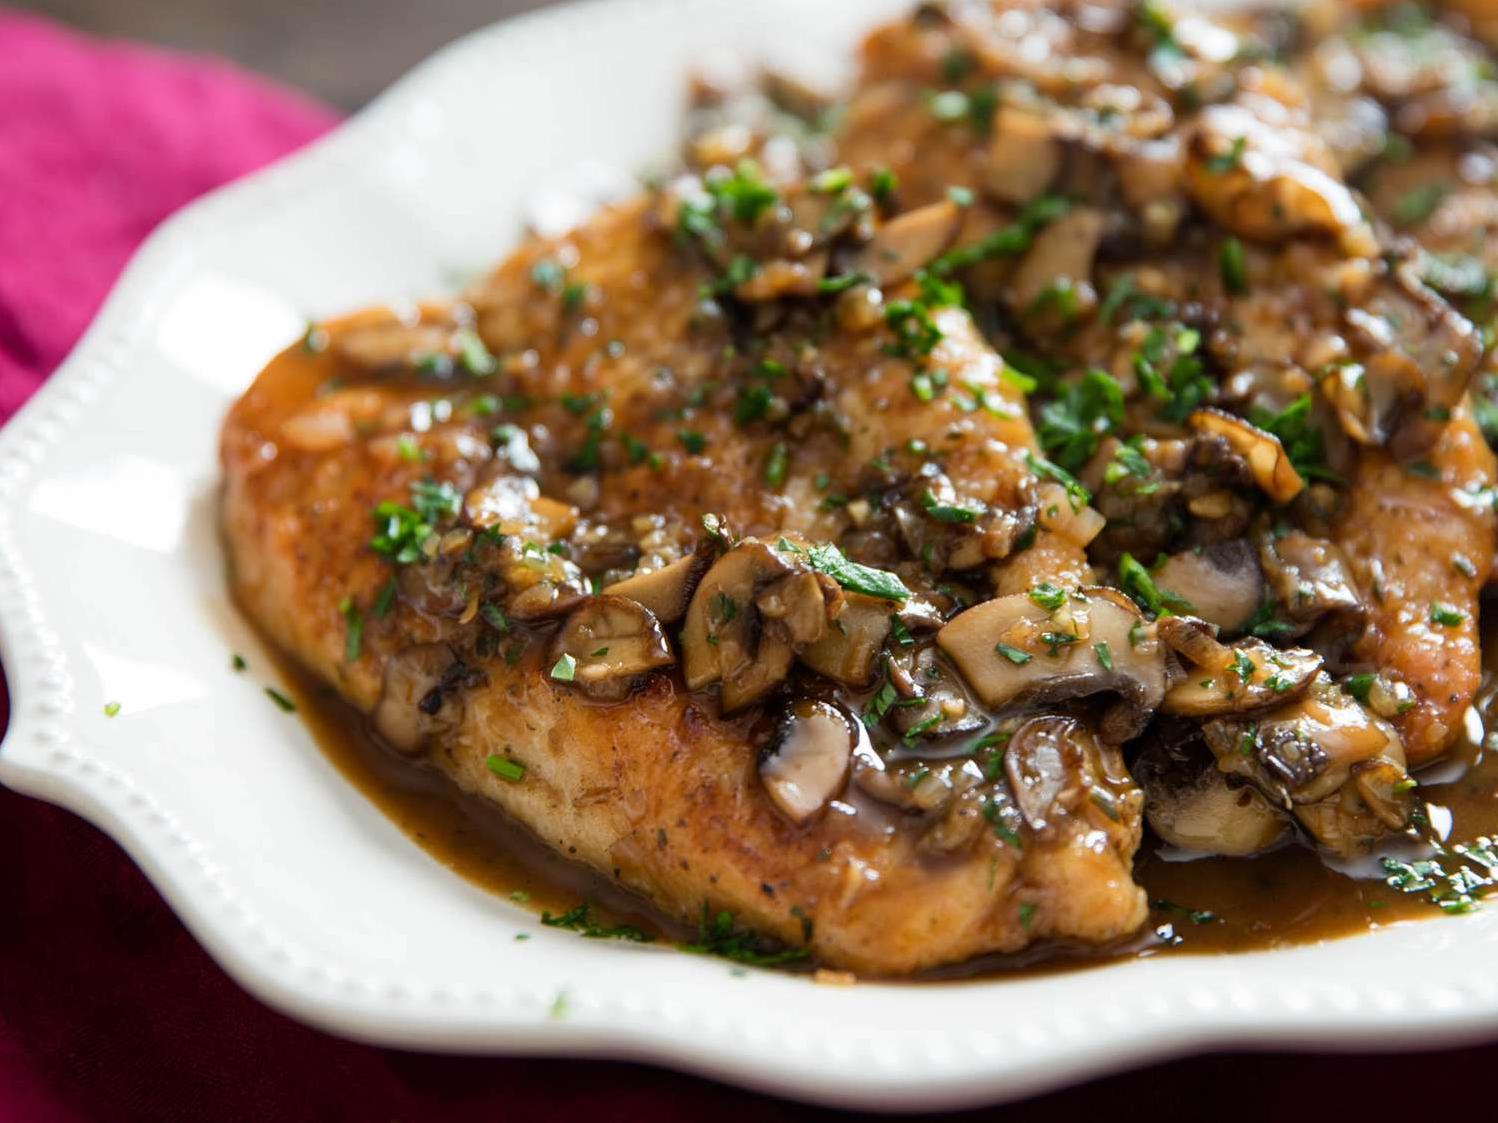  Get ready to impress your taste buds with this succulent herb roasted chicken paired with wild mushroom and Marsala wine!